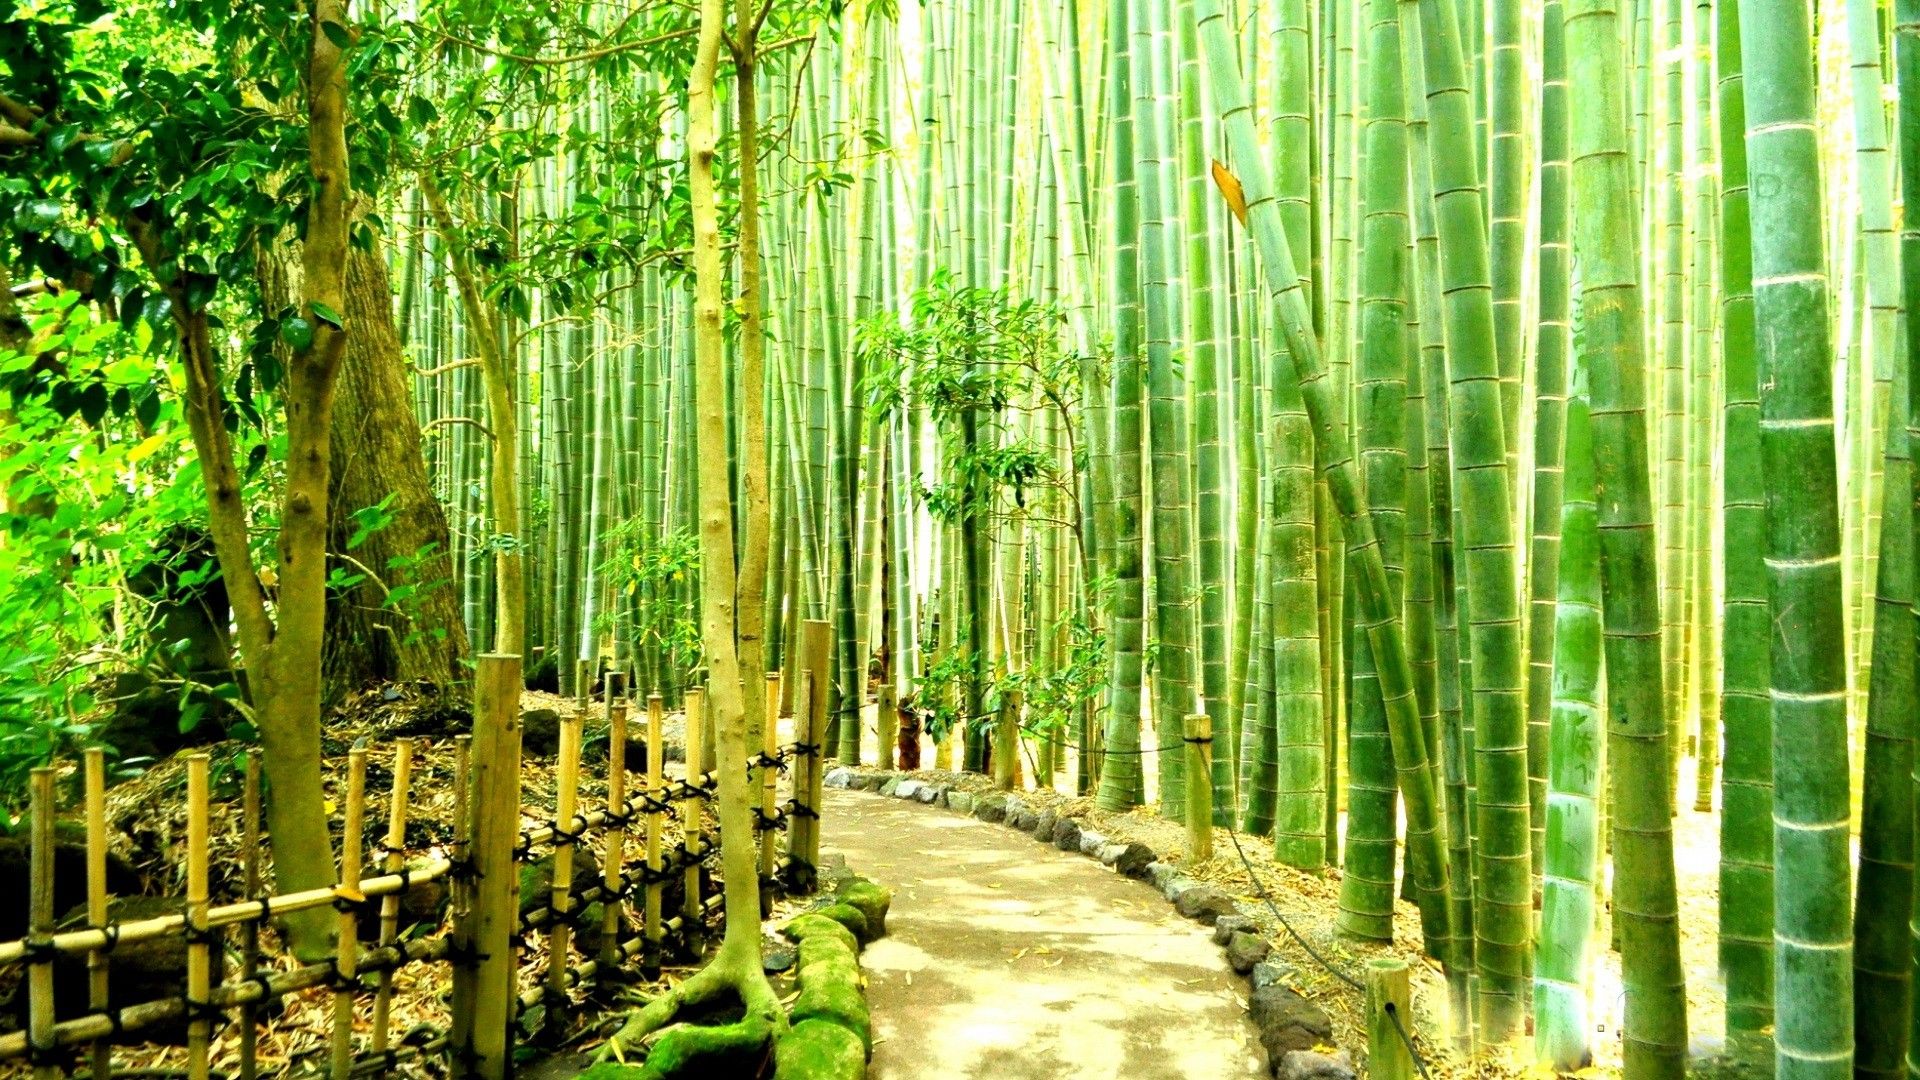 pic of bamboo tree